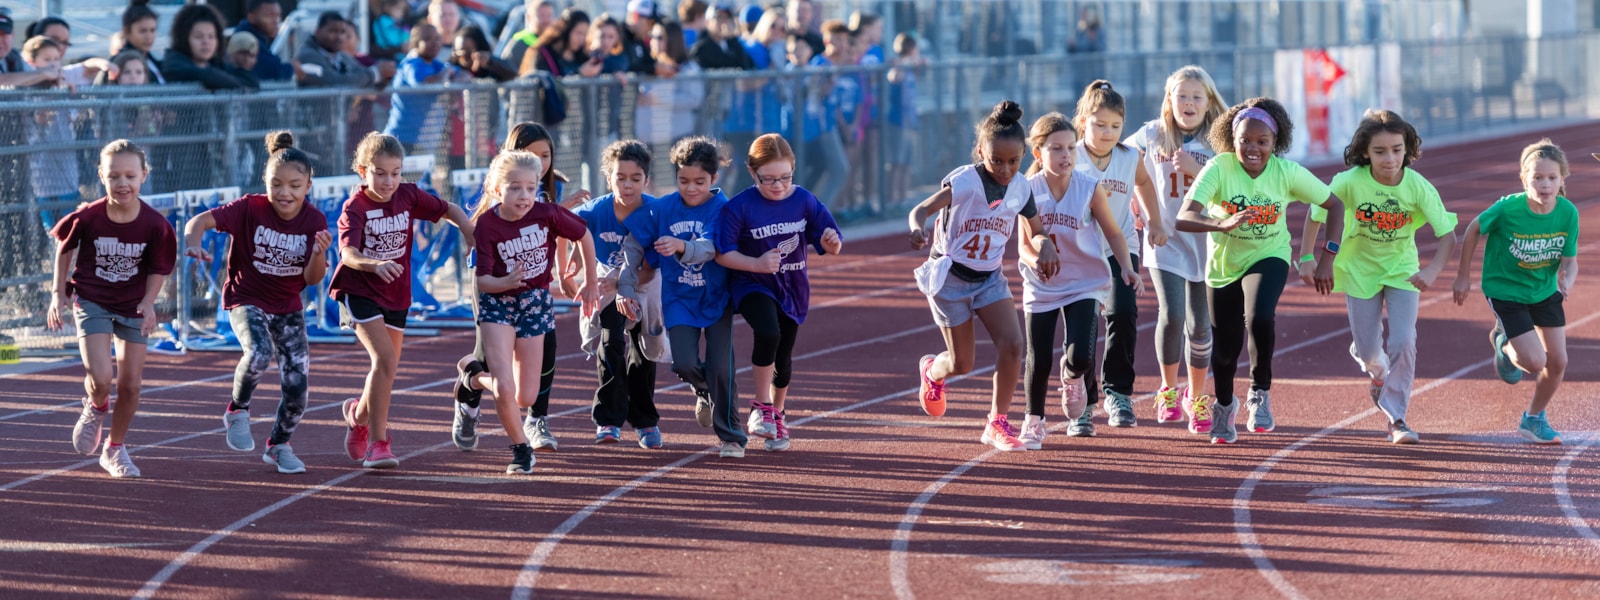 Students running in cross country race.